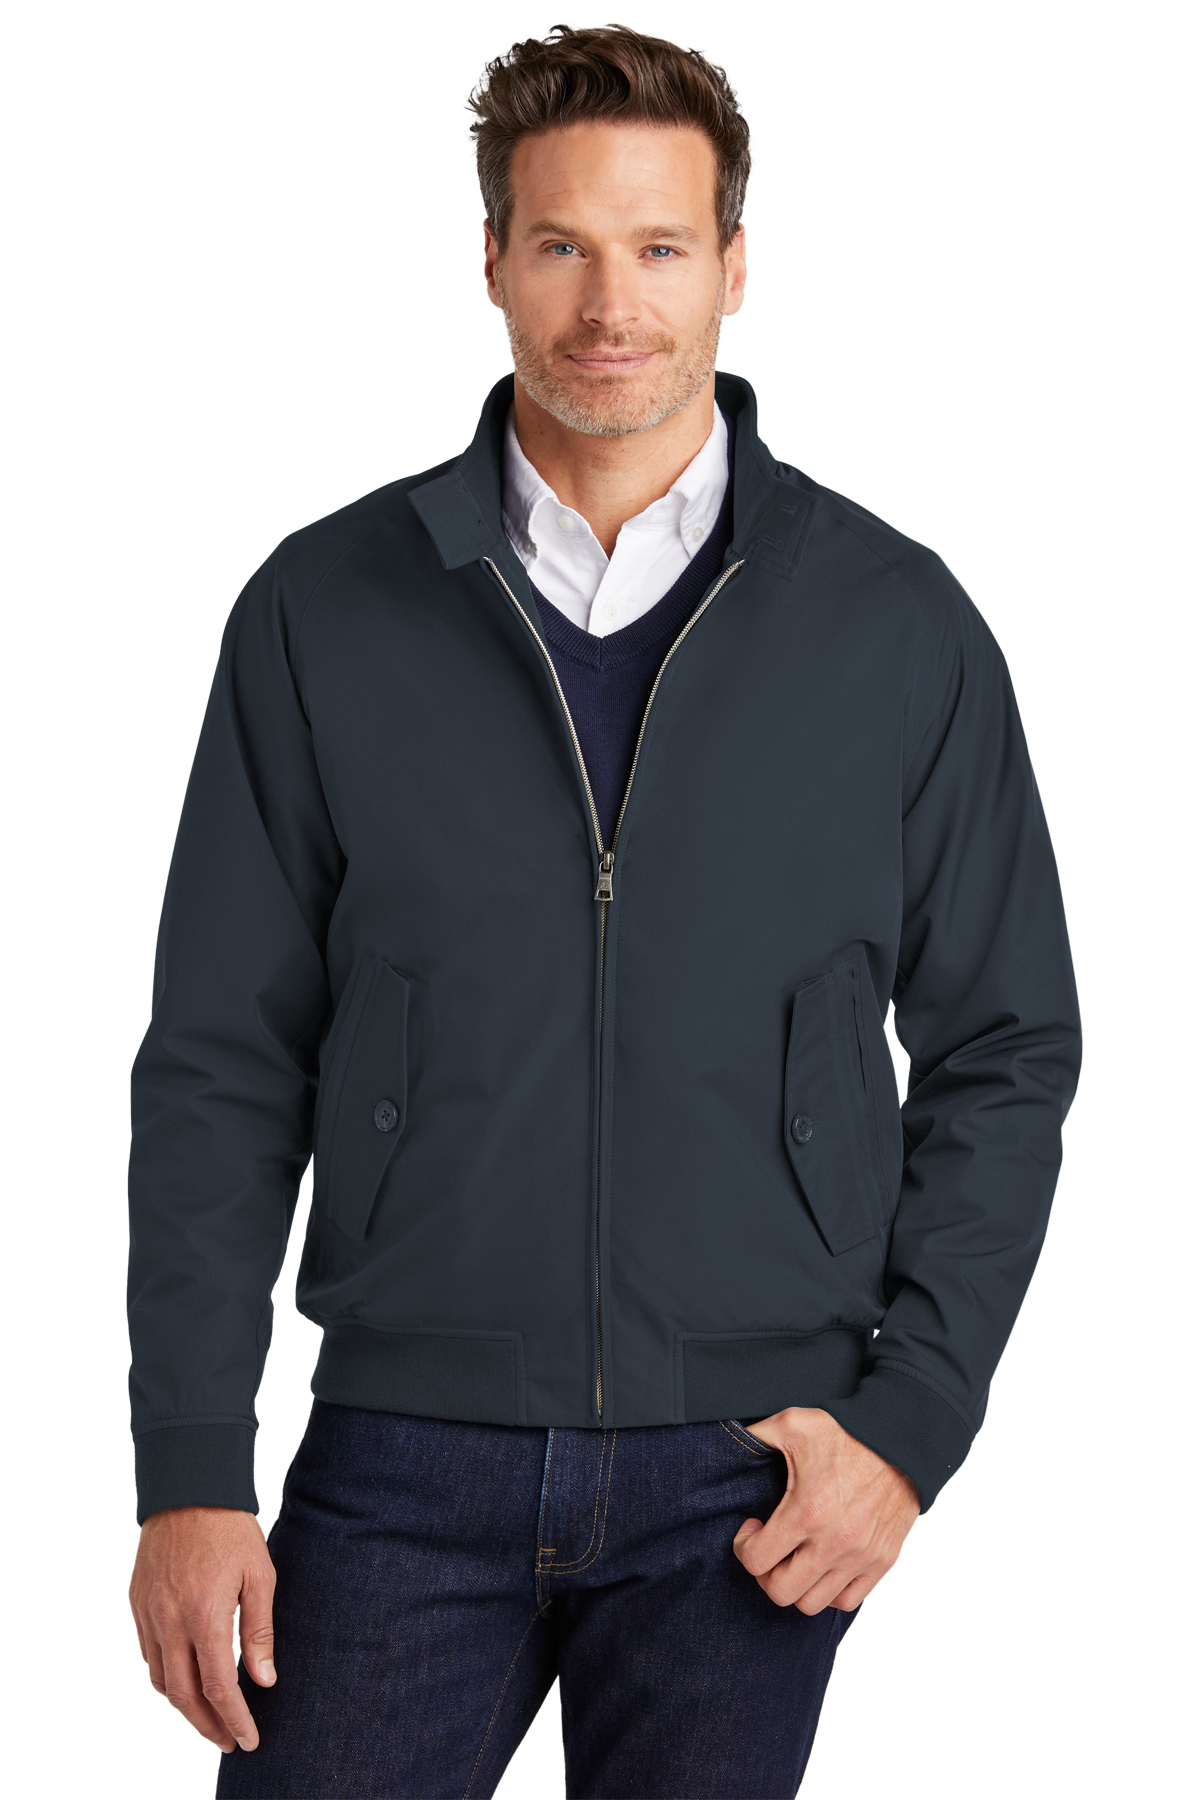 Brooks Brothers Bomber Jacket | Product | Company Casuals